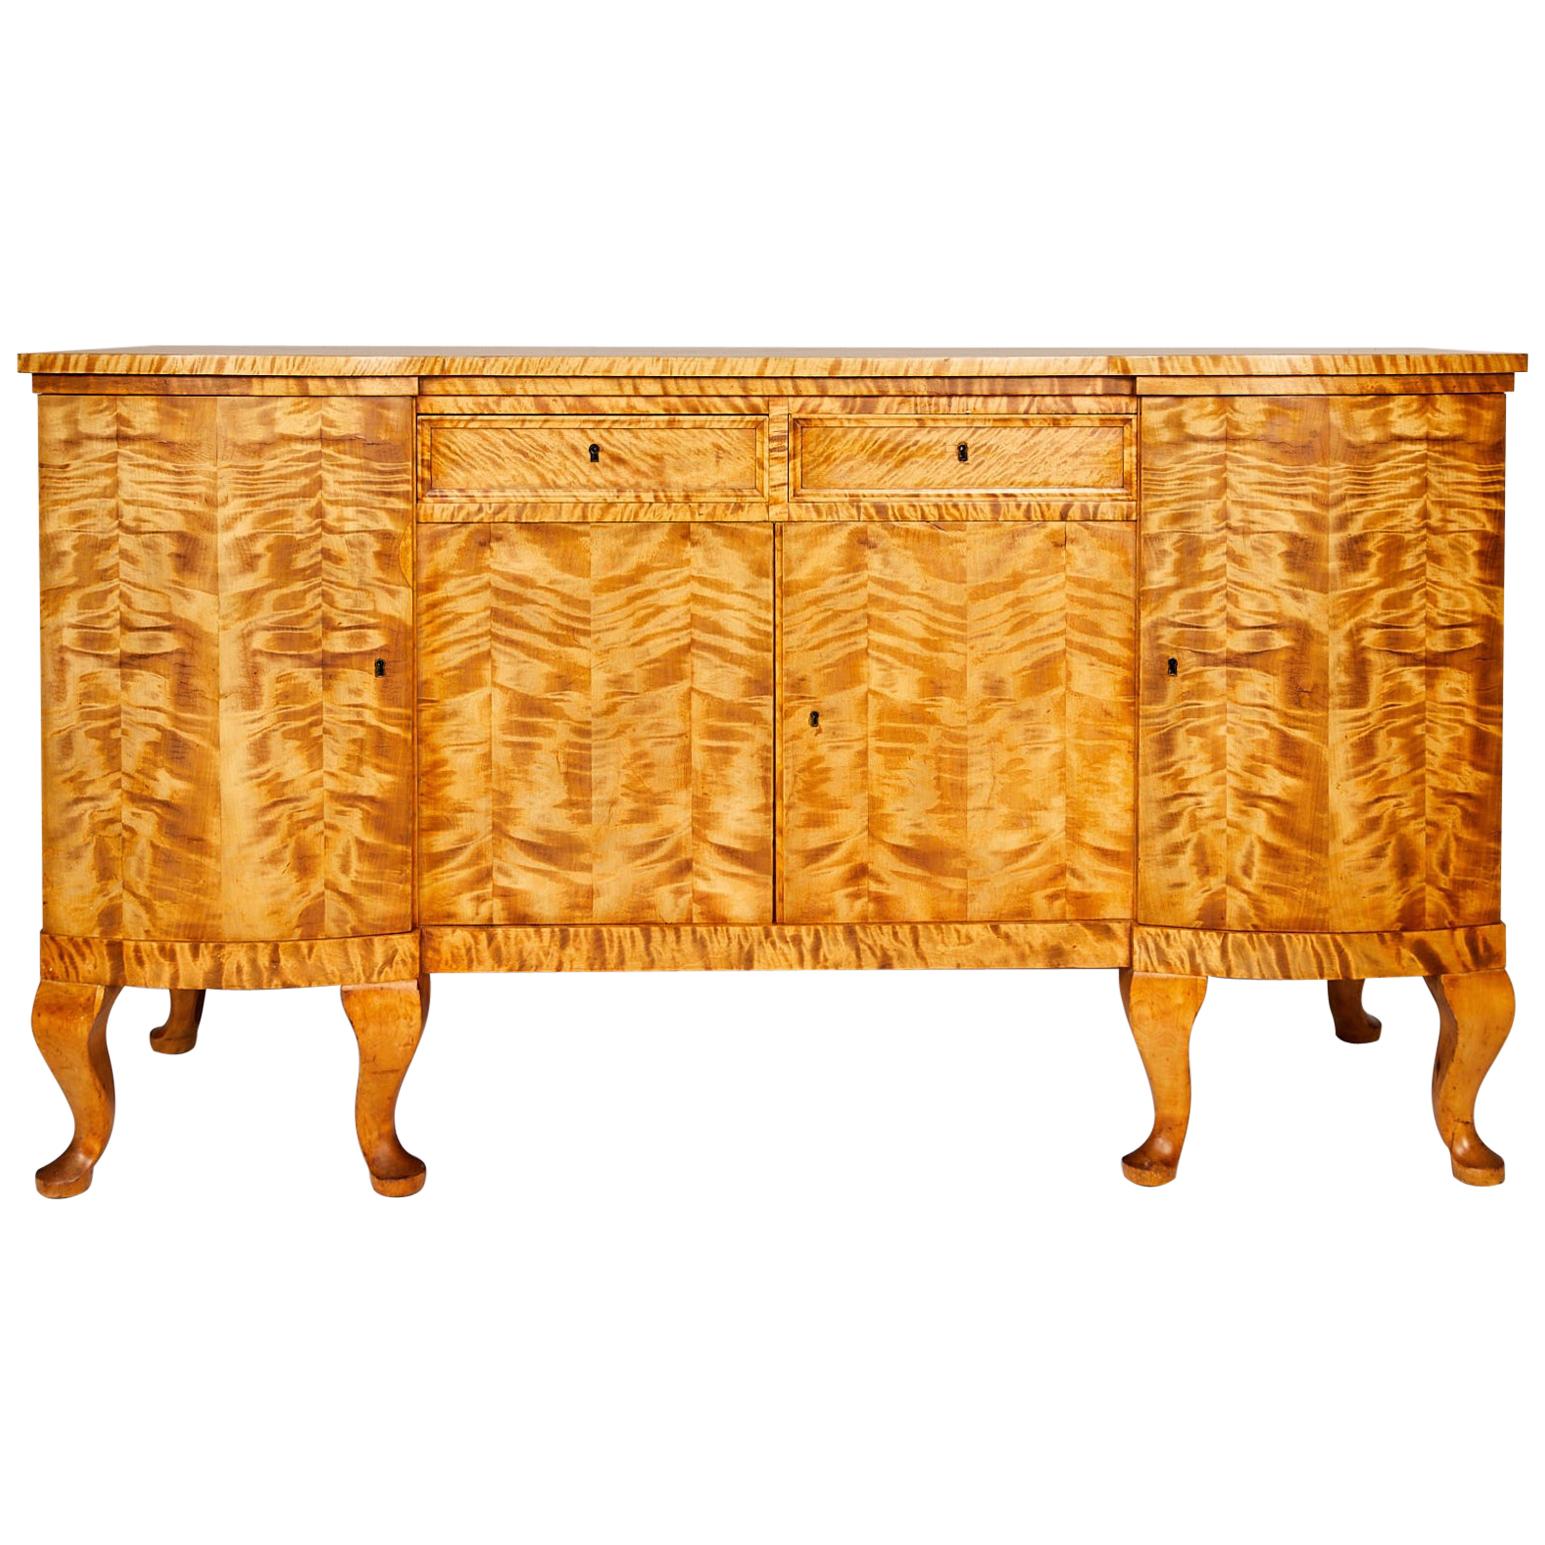 Swedish Art Deco Sideboard of Bookmatched Golden Flame Birch